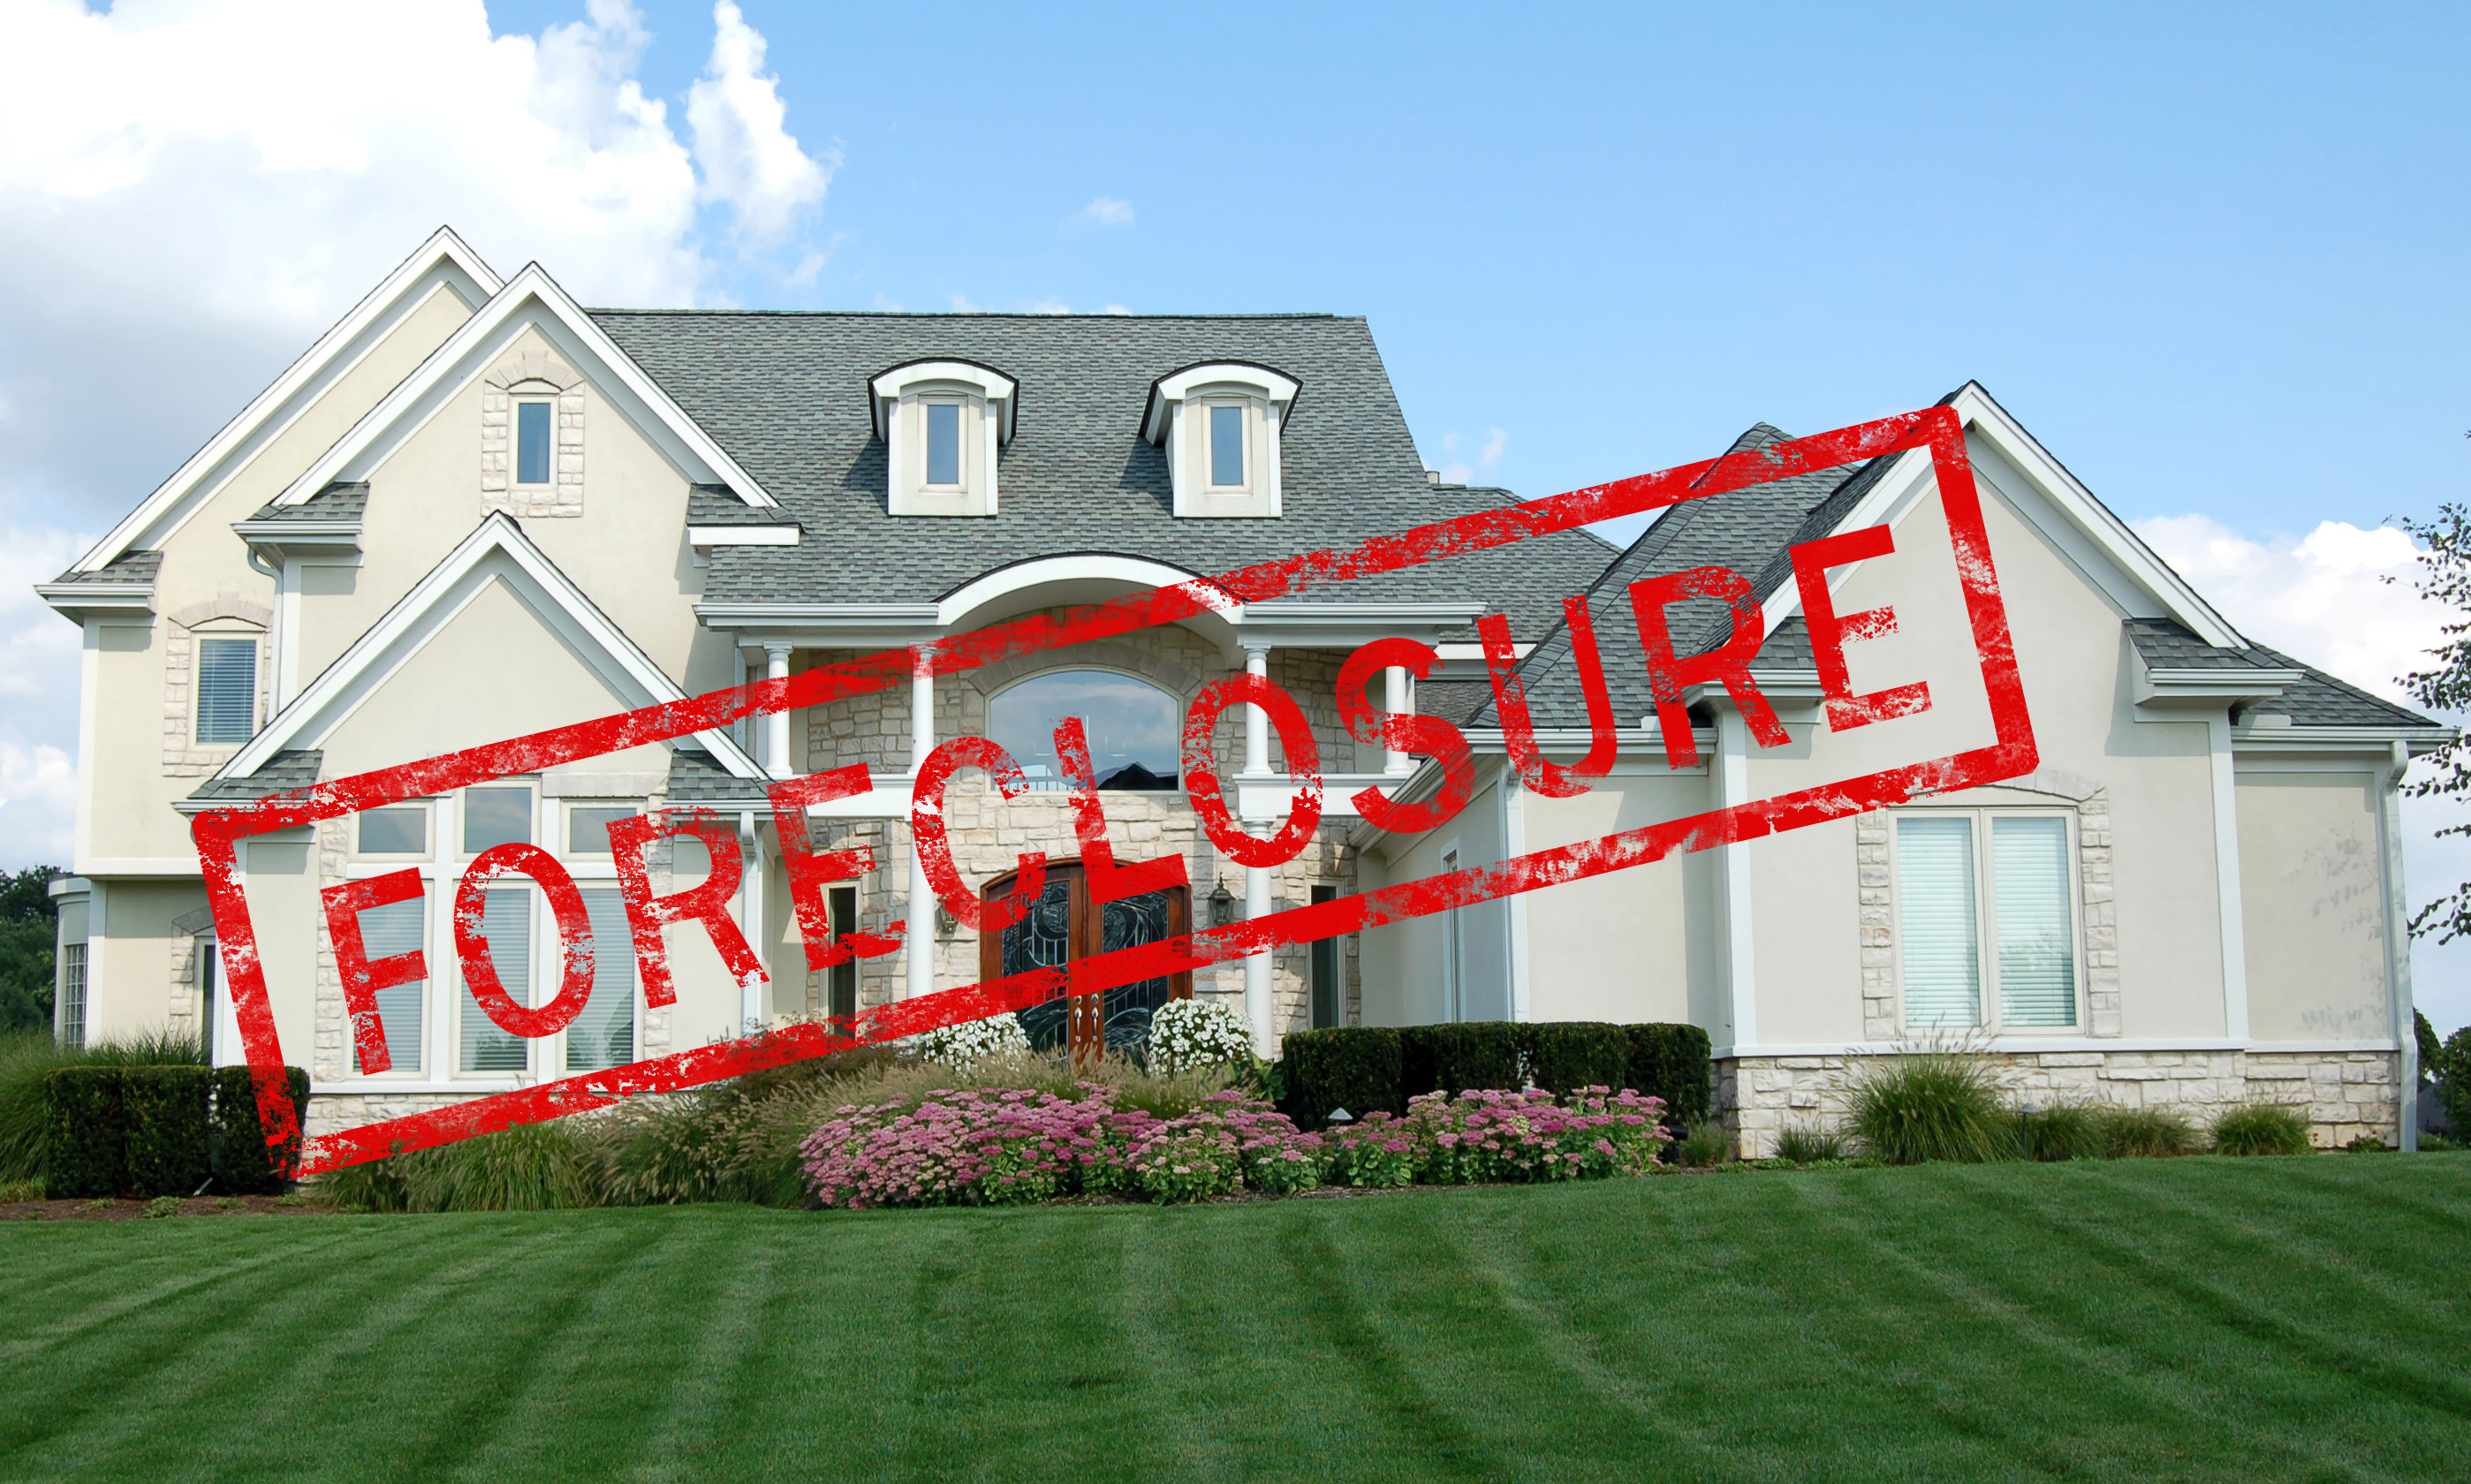 Call Wells & Associates Appraisal Service to discuss valuations on Harris foreclosures